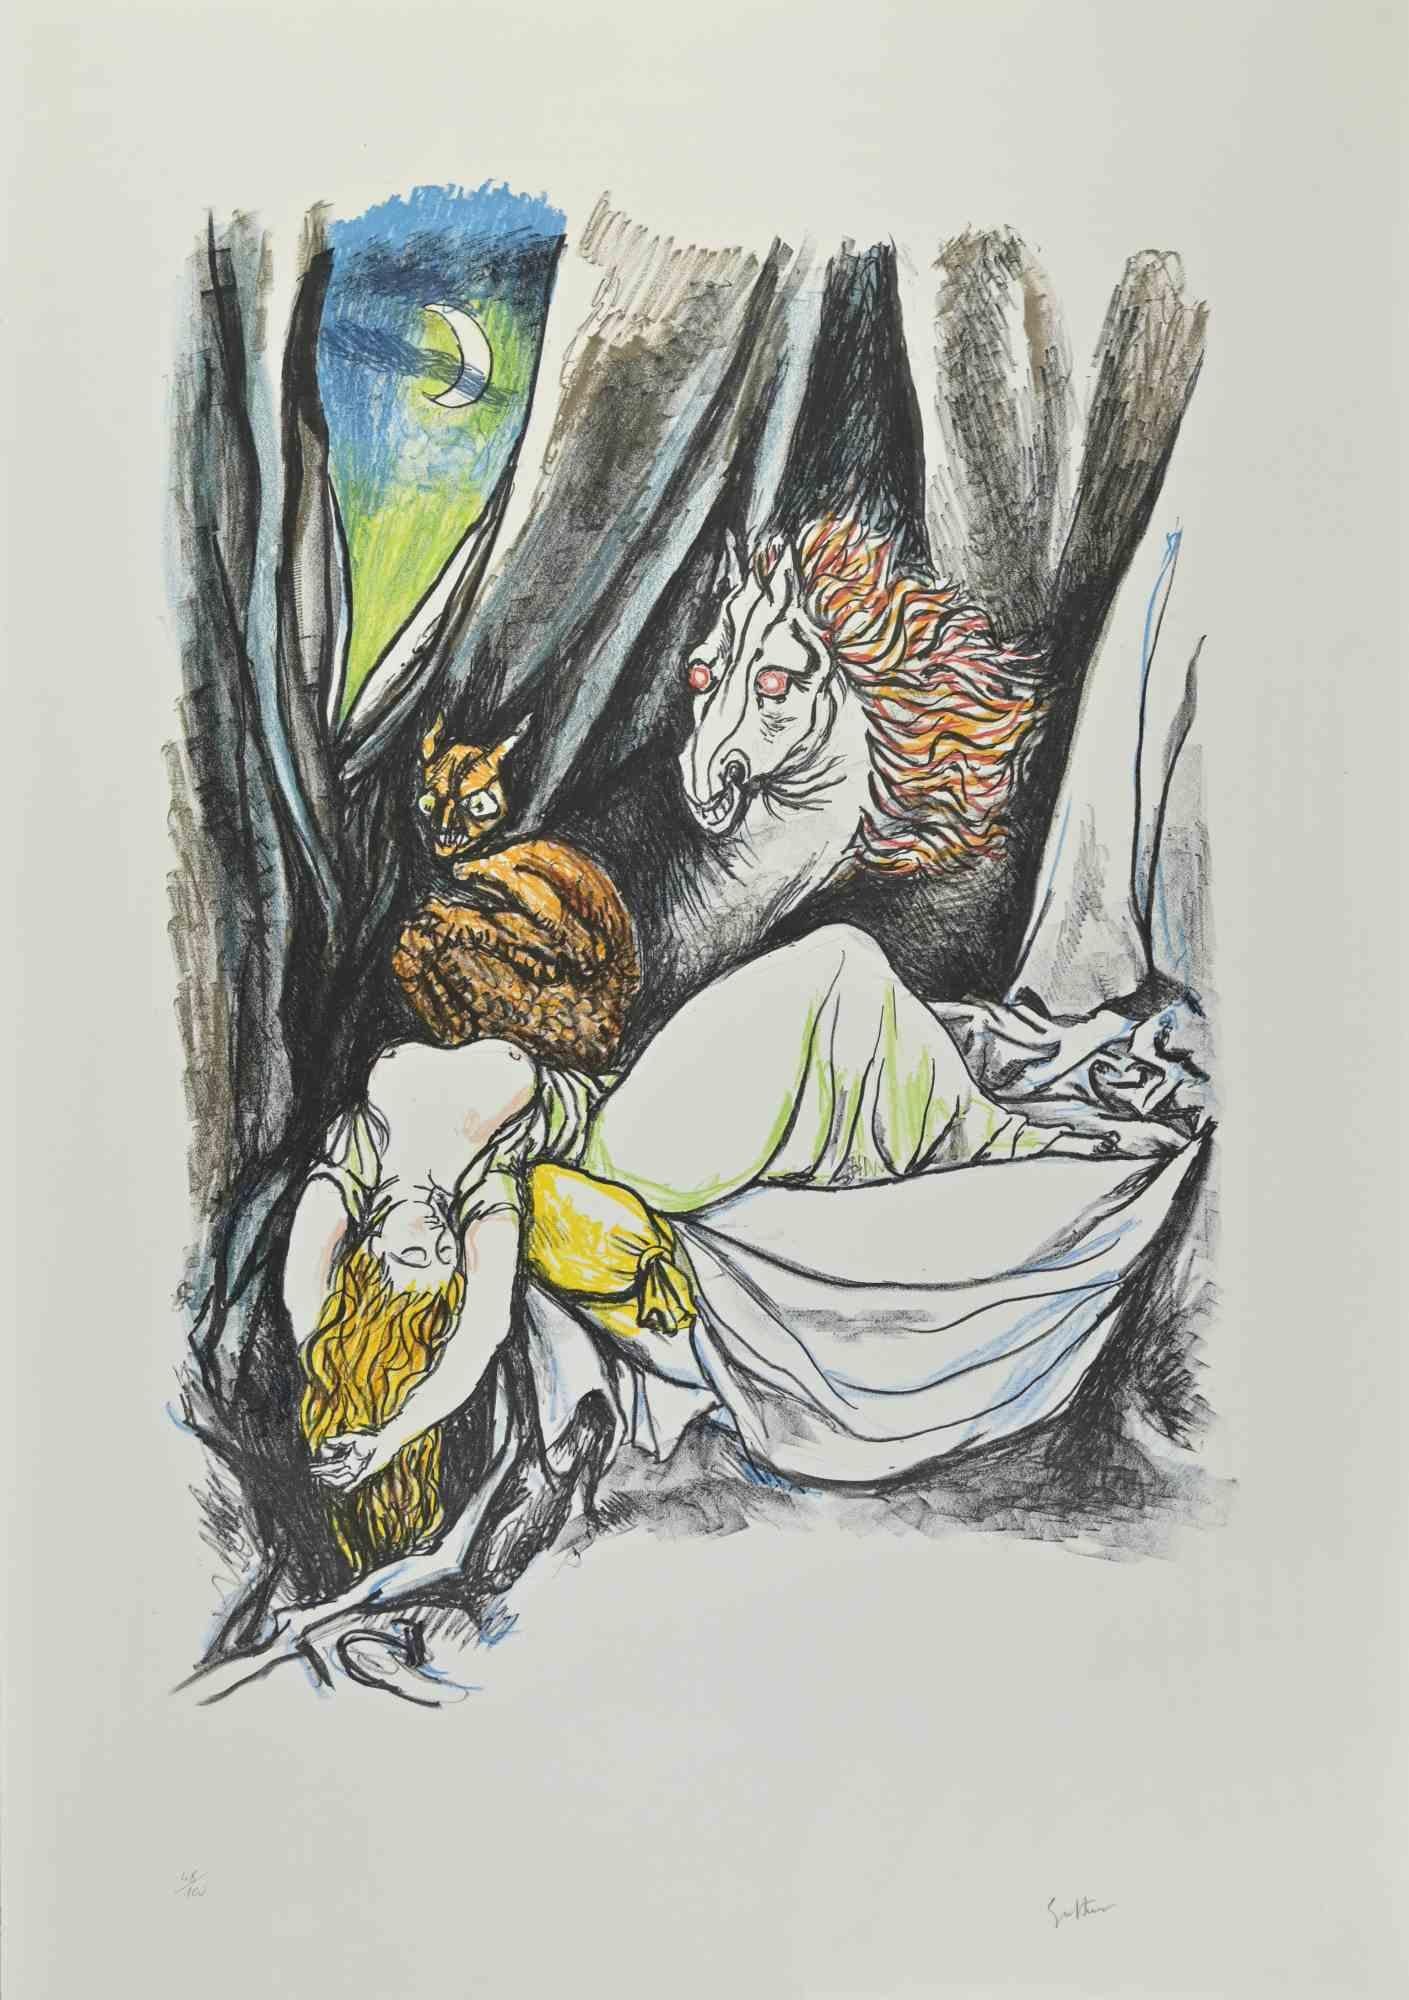 Hommage to Heinrich Fuseli is a lithograph realized by Renato Guttuso in 1980.

Hand-signed on the lower.

Numbered, edition of 100.

Drystamp "La Spirale".